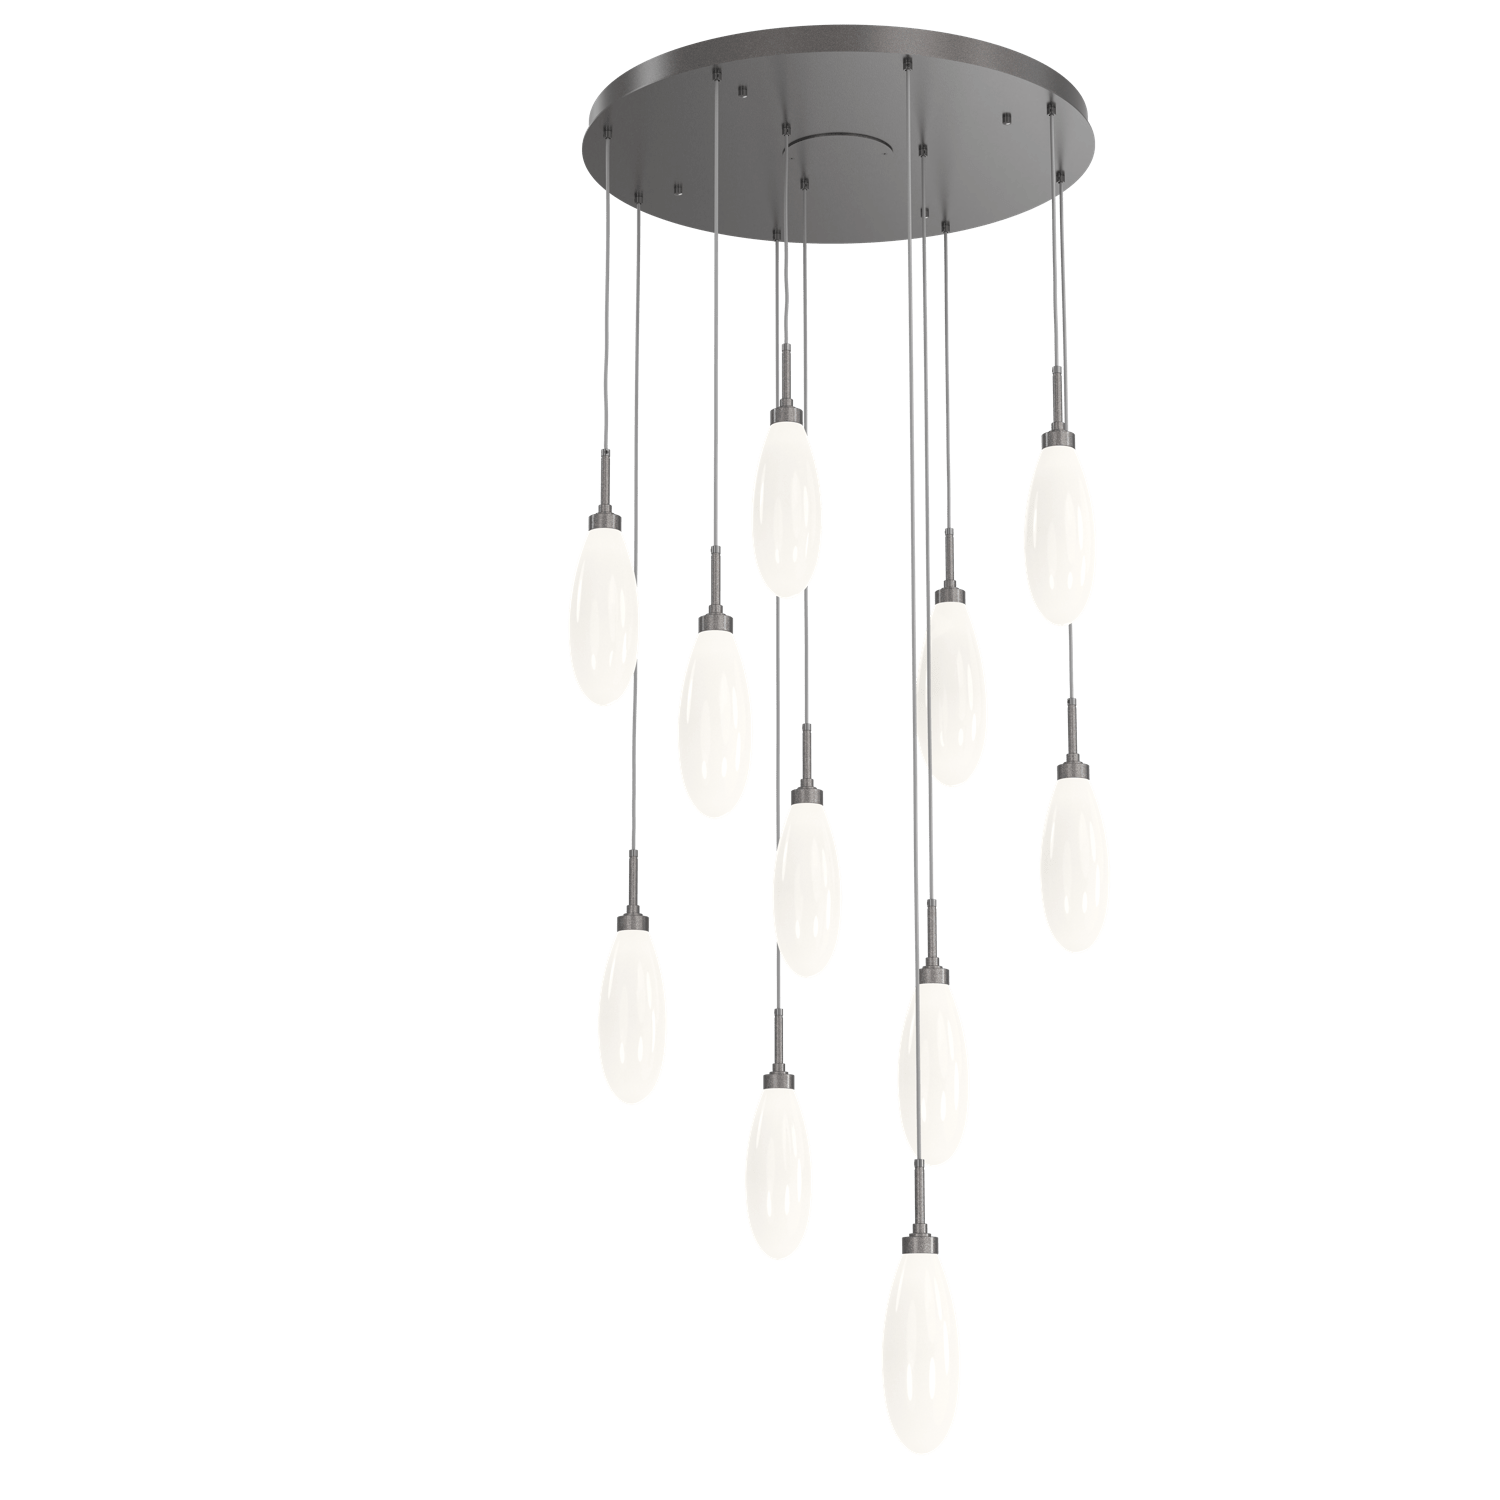 CHB0071-11-GP-WL-LL-Hammerton-Studio-Fiori-11-light-round-pendant-chandelier-with-graphite-finish-and-opal-white-glass-shades-and-LED-lamping